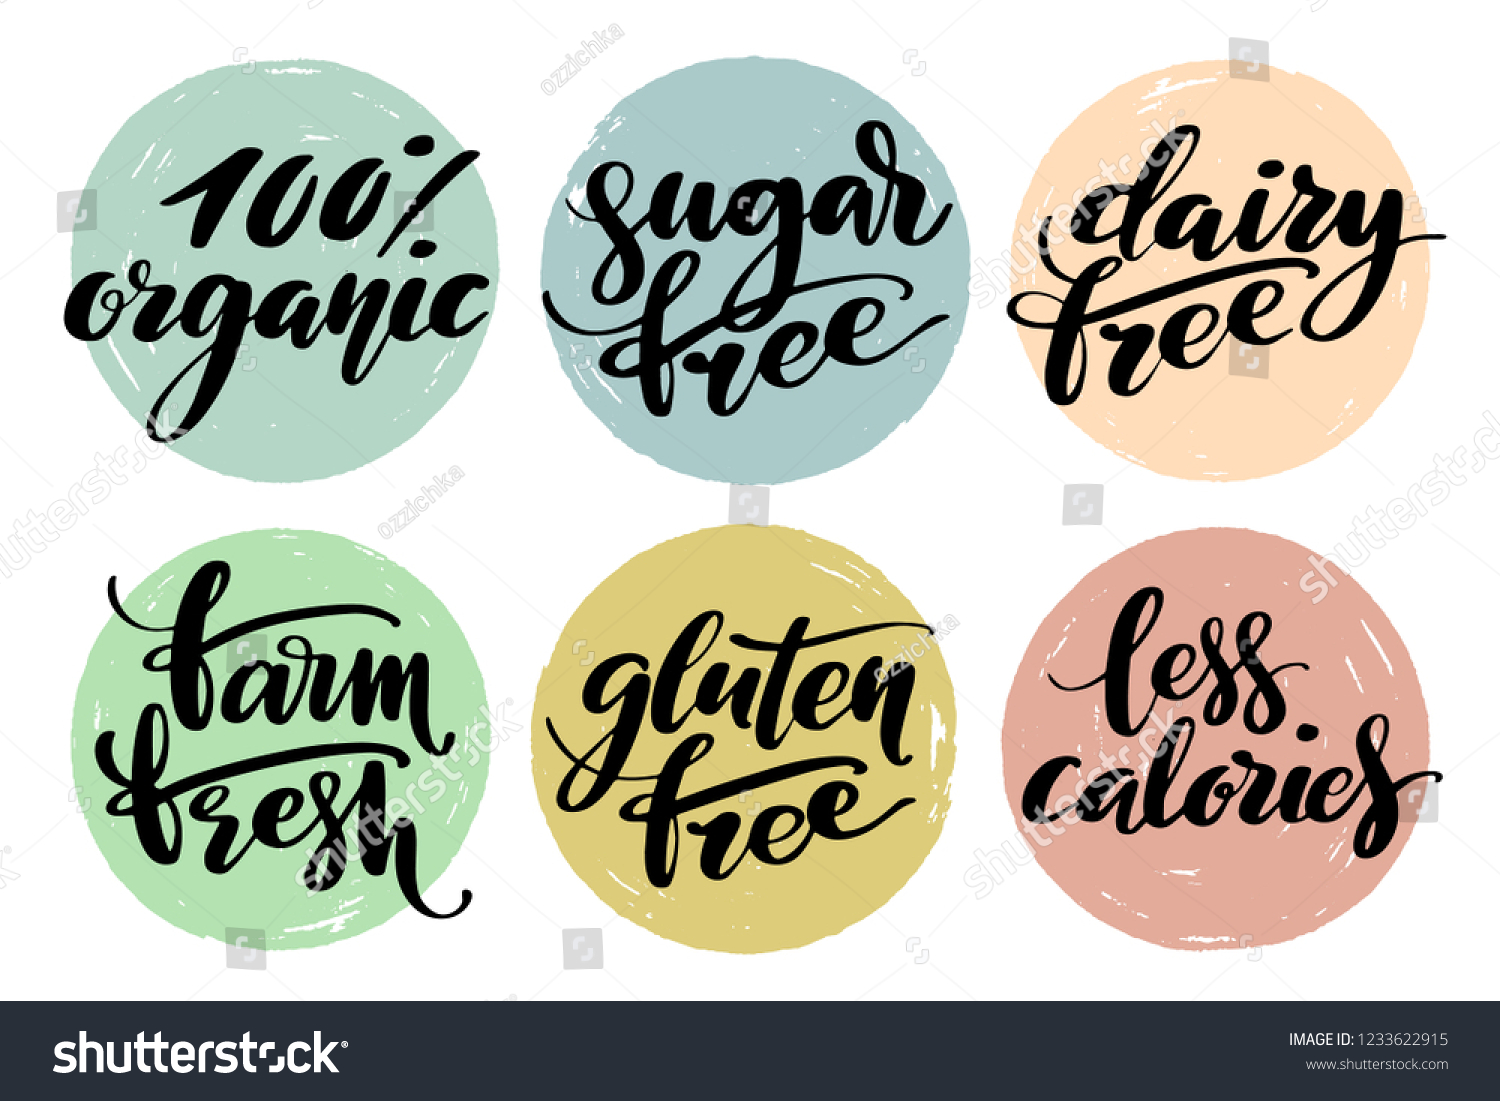 SVG of Healthy food label set. Product labels or stickers. Free from gluten, dairy and sugar food label set. 100 percent organic, farm fresh, less calories words by brush on circle backgrounds. svg